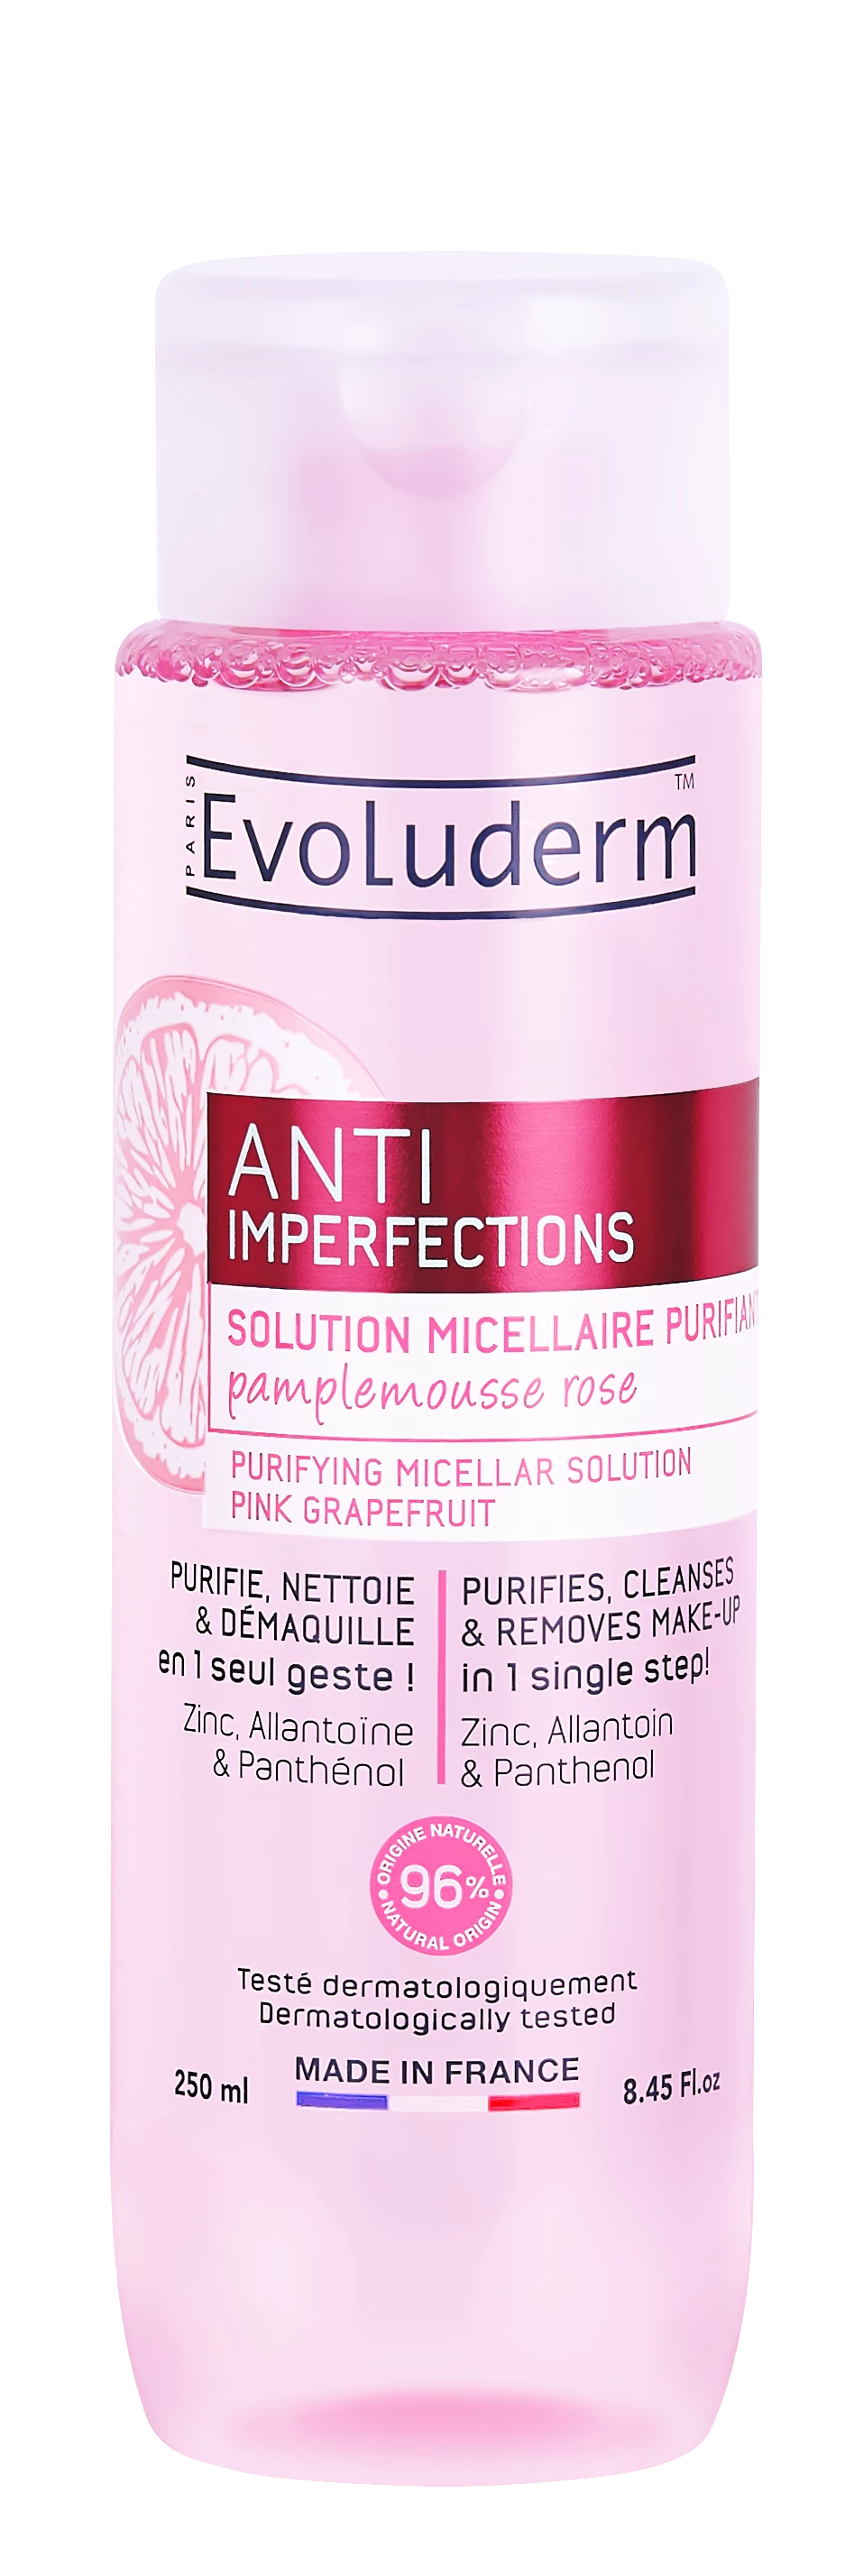 Solution Micellaire Purifiante Anti-imperfections 250ml - Evoluderm